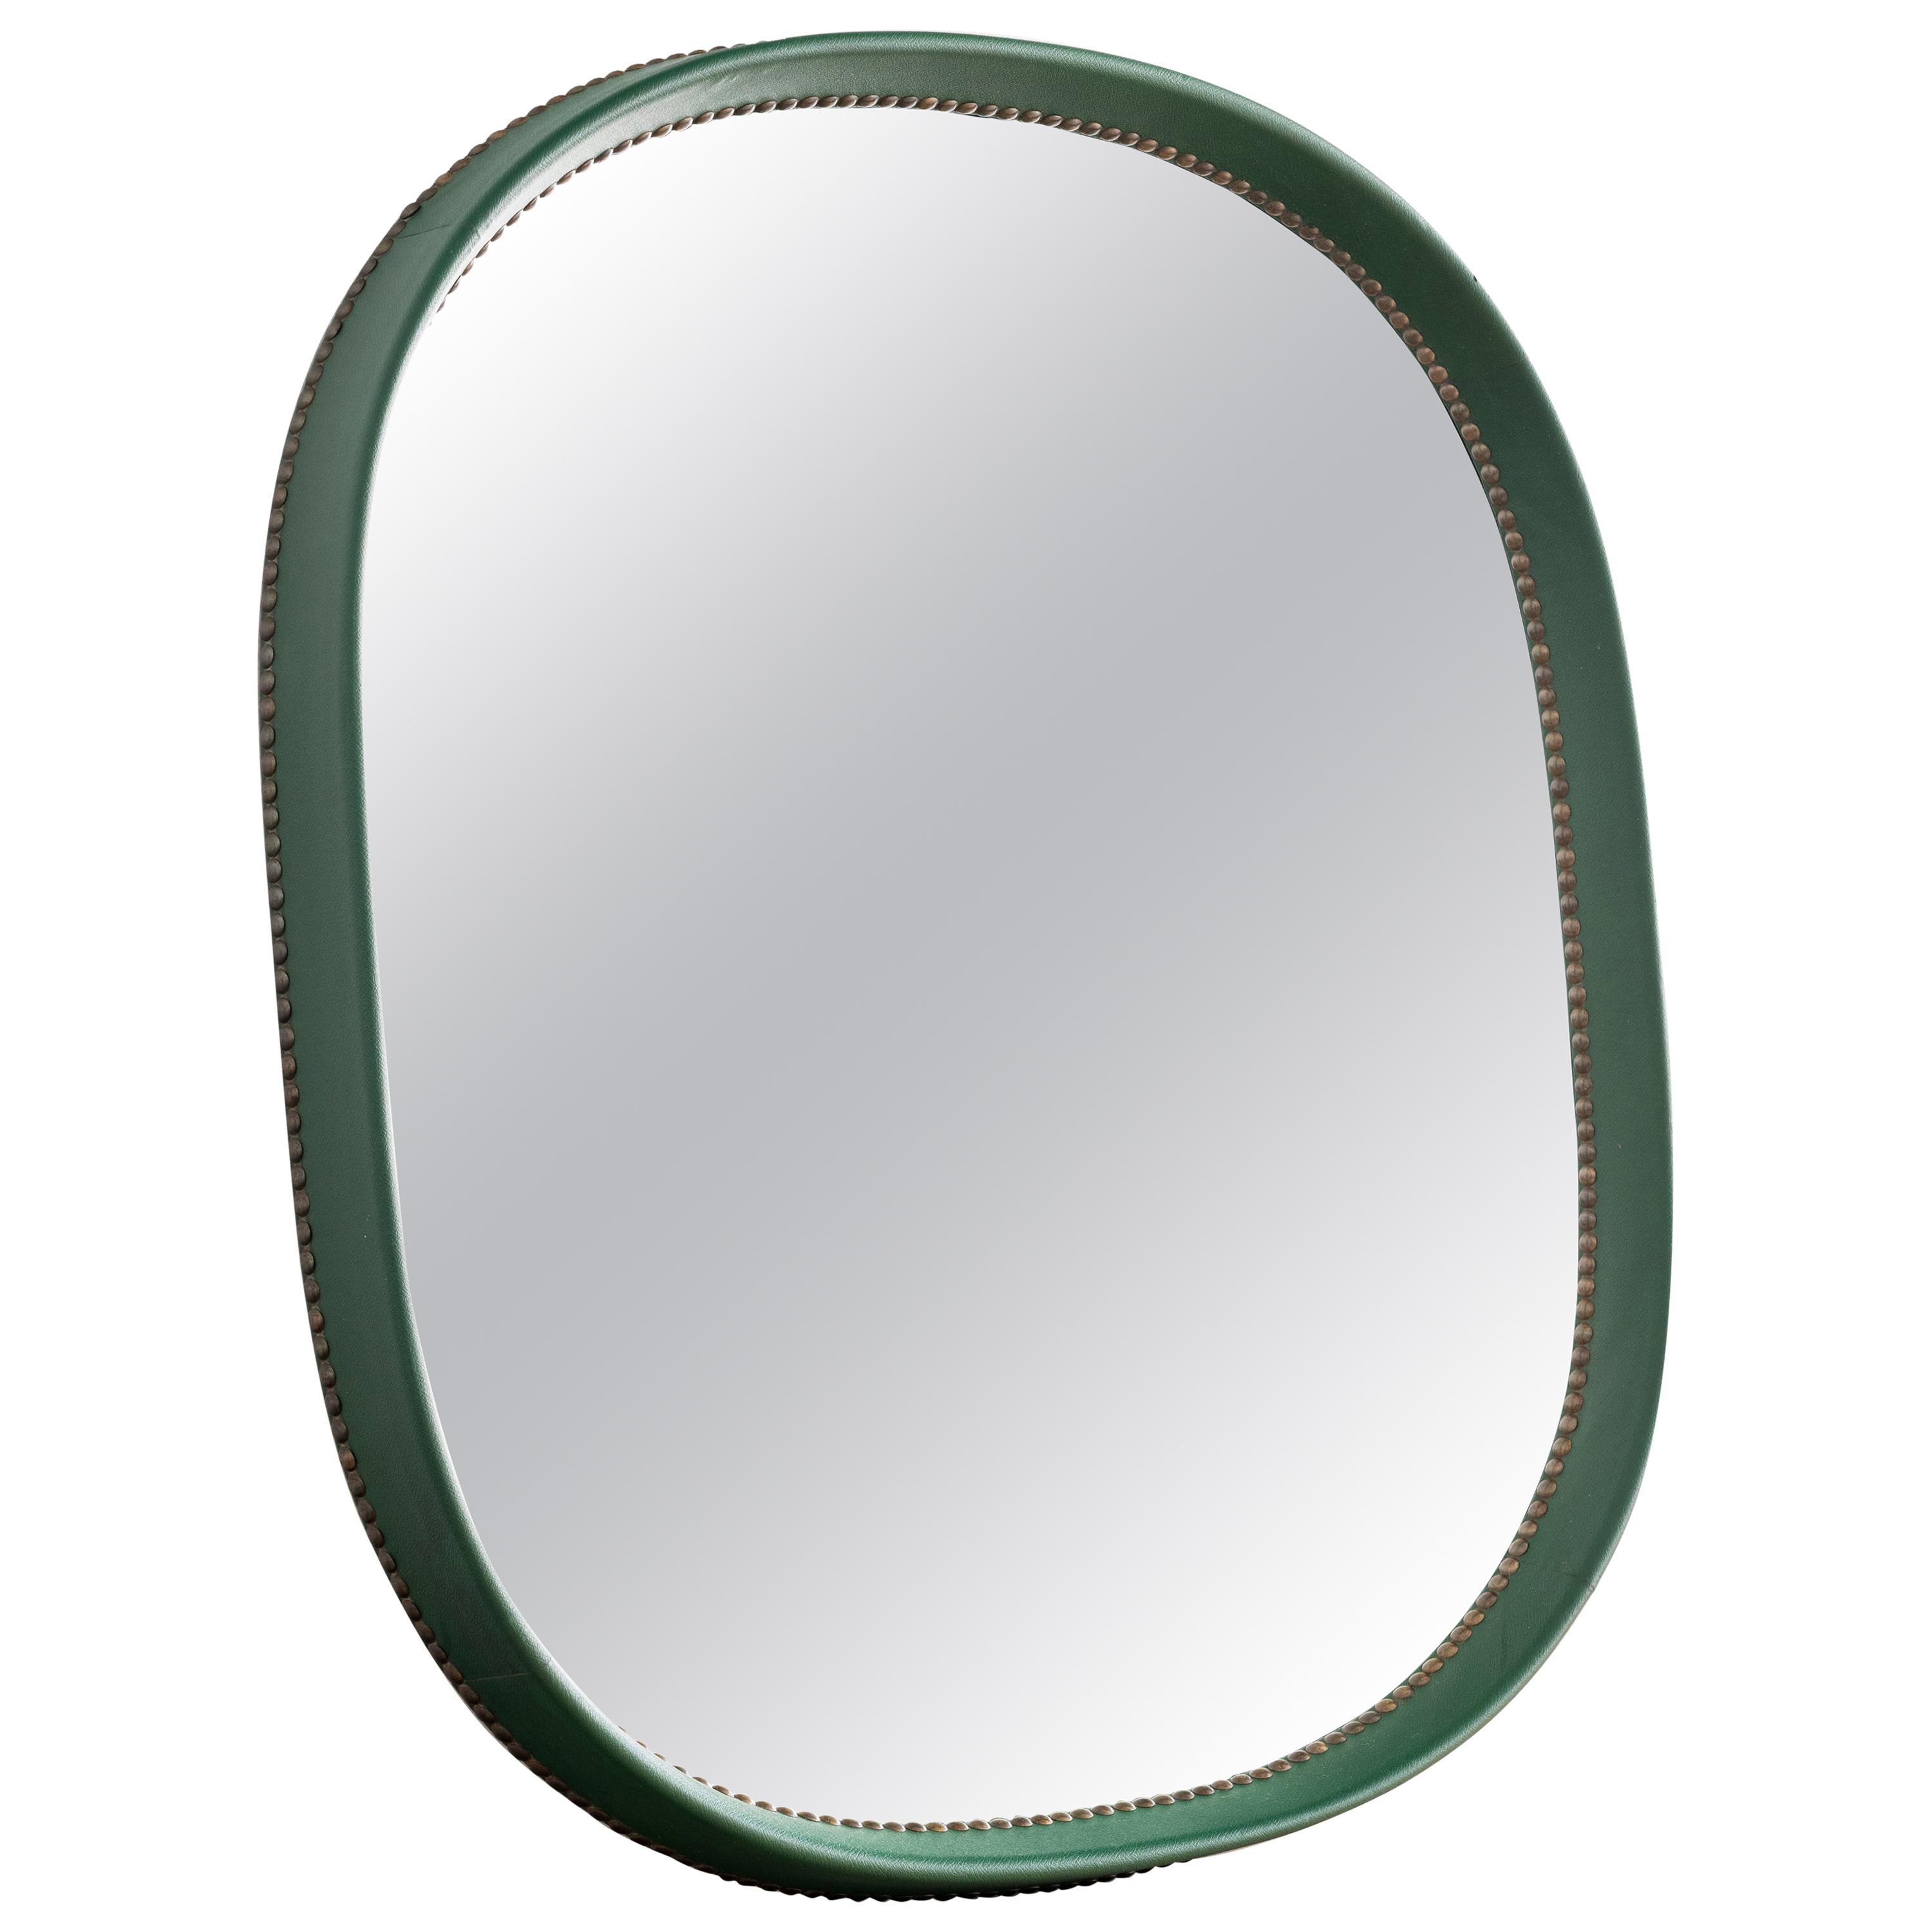 Faux Leather Green Mirror by Otto Schulz